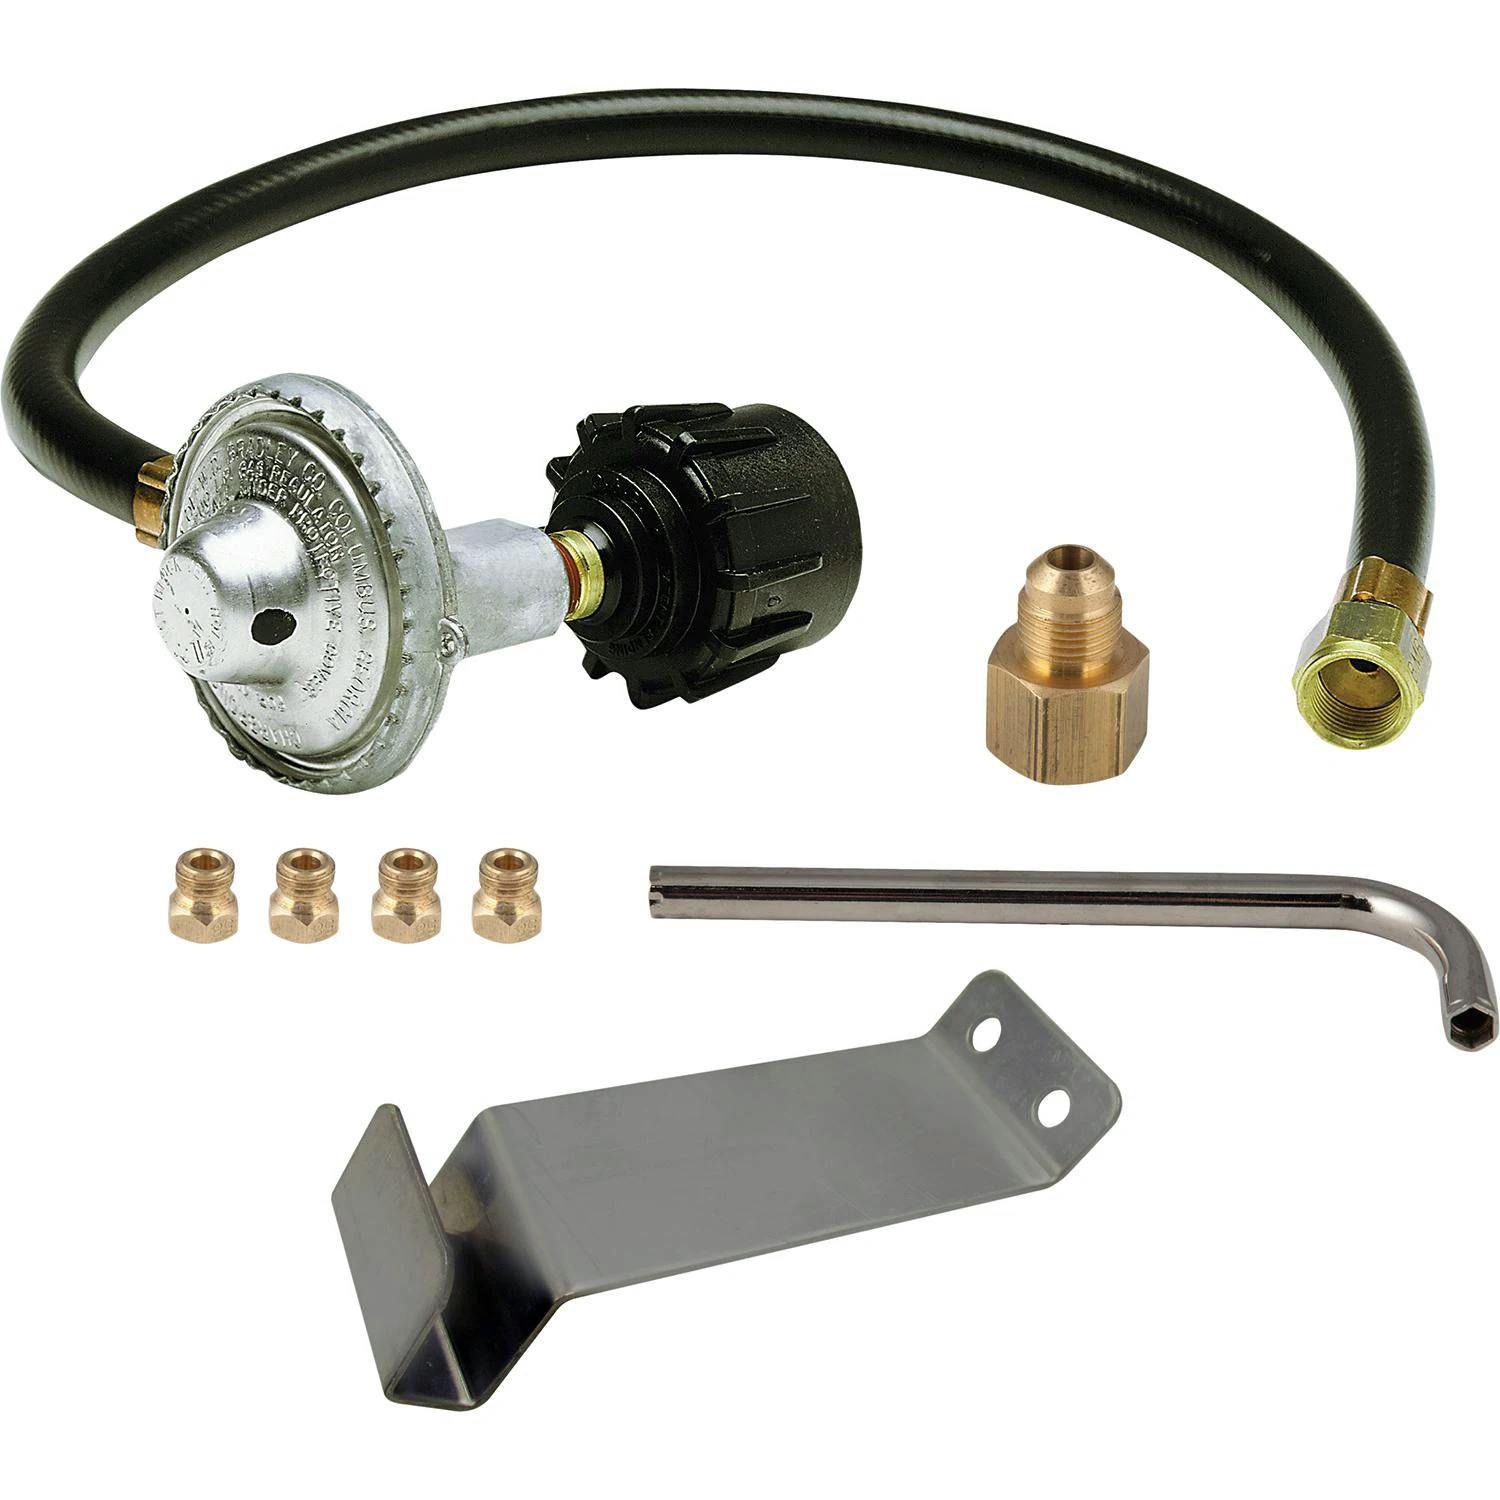 Saber Ez Conversion Kit · Natural Gas To Propane · Fits Grill Models Ending In 17 Or Higher